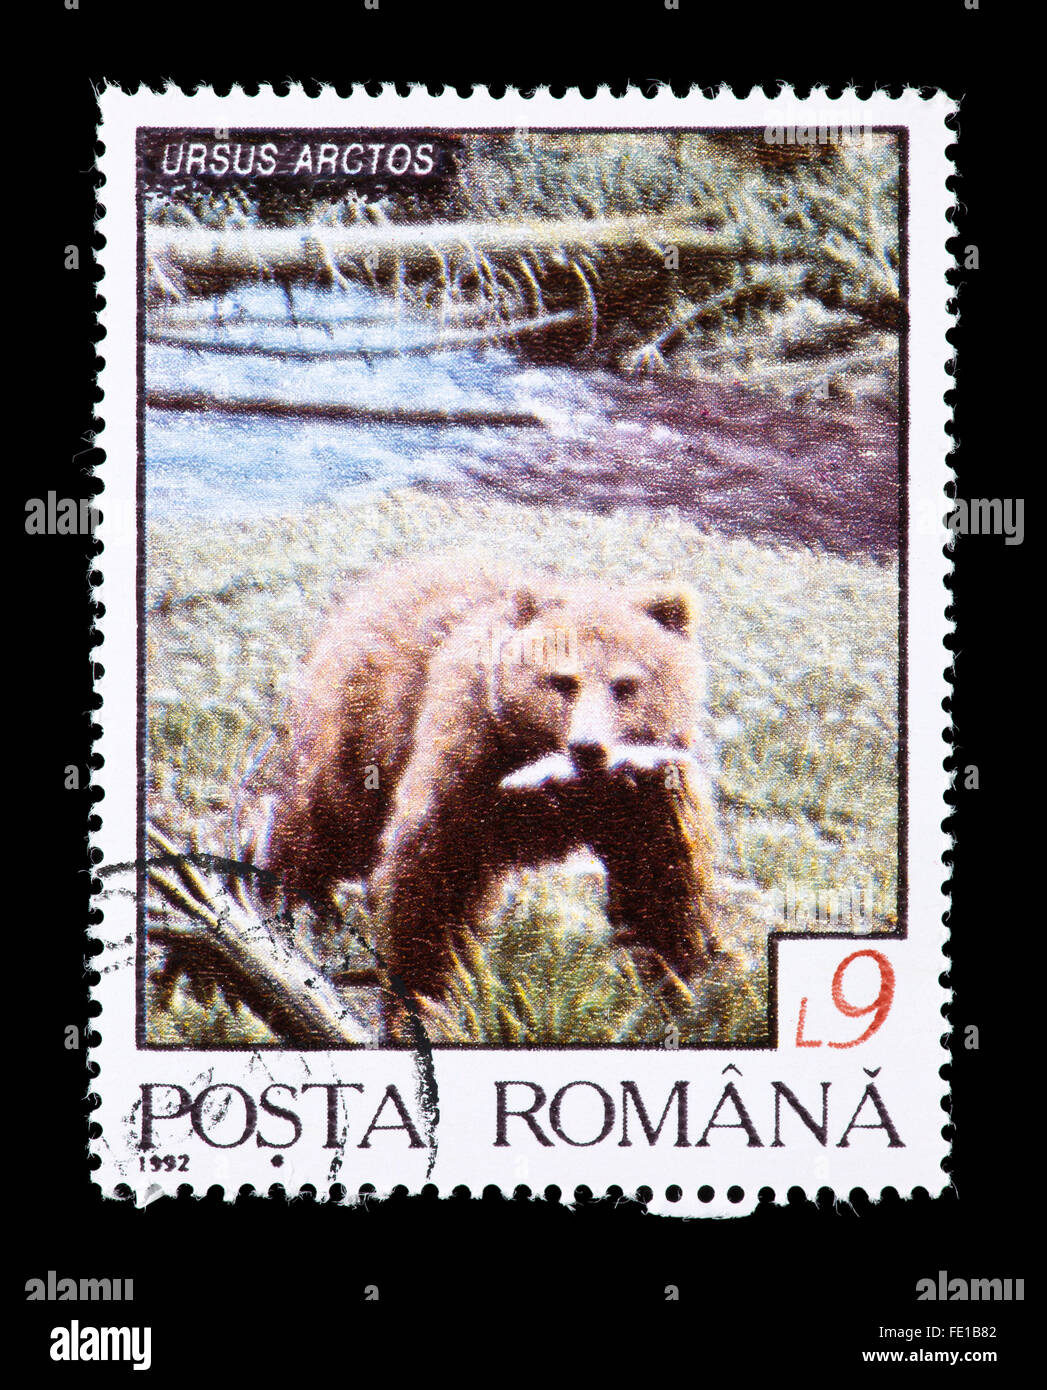 Postage stamp from Romania depicting a brown bear (Ursus arctos) with a fish. Stock Photo